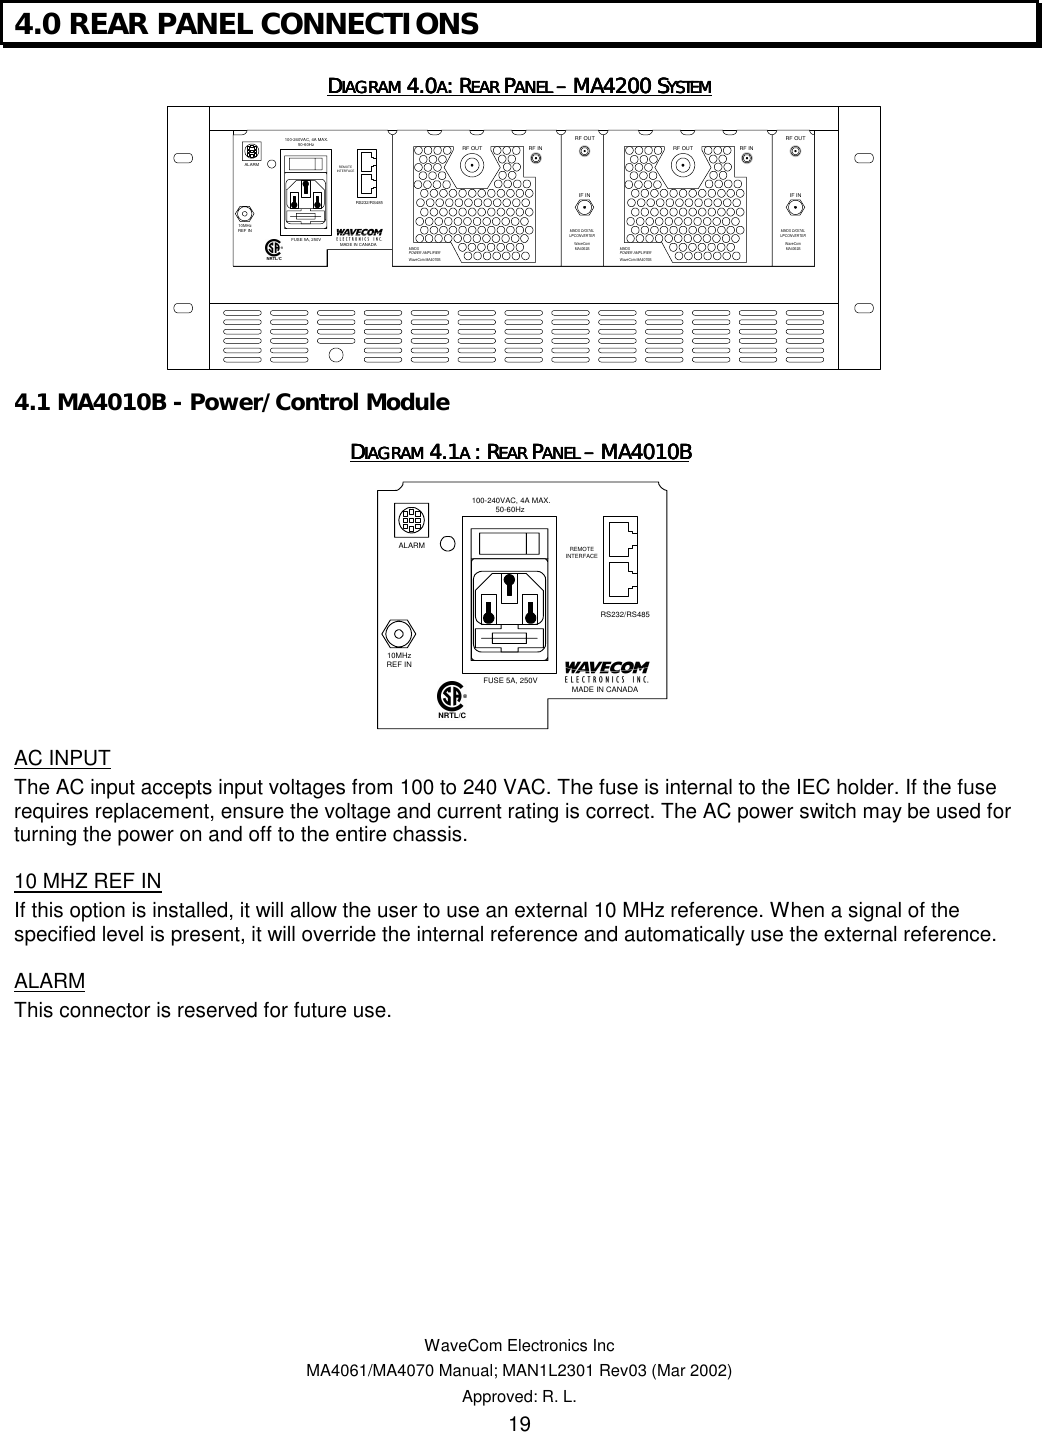   WaveCom Electronics Inc MA4061/MA4070 Manual; MAN1L2301 Rev03 (Mar 2002) Approved: R. L. 19 4.0 REAR PANEL CONNECTIONS DDDDIAGRAM IAGRAM IAGRAM IAGRAM 4.04.04.04.0AAAA: R: R: R: REAR EAR EAR EAR PPPPANEL ANEL ANEL ANEL –––– MA4200 S MA4200 S MA4200 S MA4200 SYSTEMYSTEMYSTEMYSTEM    4.1 MA4010B - Power/Control Module DDDDIAGRAM IAGRAM IAGRAM IAGRAM 4.14.14.14.1A A A A : R: R: R: REAR EAR EAR EAR PPPPANEL ANEL ANEL ANEL –––– MA4010B MA4010B MA4010B MA4010B    AC INPUT  The AC input accepts input voltages from 100 to 240 VAC. The fuse is internal to the IEC holder. If the fuse requires replacement, ensure the voltage and current rating is correct. The AC power switch may be used for turning the power on and off to the entire chassis. 10 MHZ REF IN If this option is installed, it will allow the user to use an external 10 MHz reference. When a signal of the specified level is present, it will override the internal reference and automatically use the external reference. ALARM This connector is reserved for future use.  REMOTEINTERFACEMADE IN CANADA100-240VAC, 4A MAX.50-60HzFUSE 5A, 250VALARM10MHzREF INRS232/RS485NRTL/CRF OUTIF INMMDS DIGITALUPCONVERTERWaveComMA4061BRF OUTIF INMMDS DIGITALUPCONVERTERWaveComMA4061BRF OUT RF INMMDSPOWER AMPLIFIERWaveCom MA4070BRF OUT RF INMMDSPOWER AMPLIFIERWaveCom MA4070BREMOTEINTERFACEMADE IN CANADA100-240VAC, 4A MAX.50-60HzFUSE 5A, 250VALARM10MHzREF INRS232/RS485NRTL/C